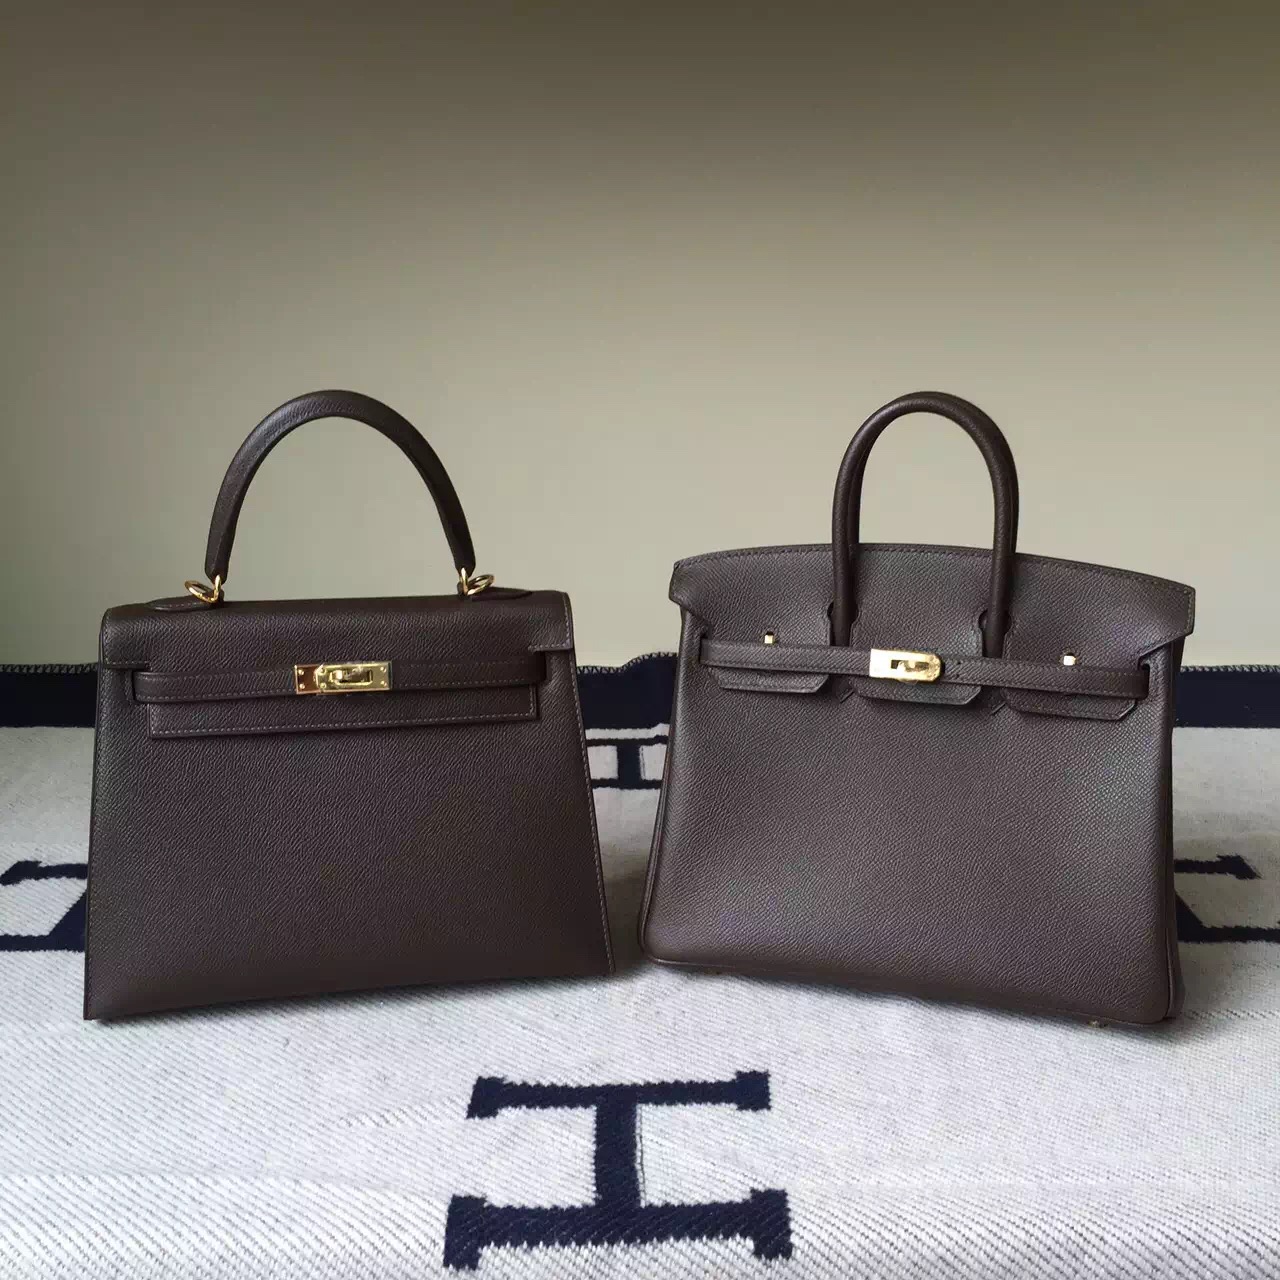 Hand Stitching Hermes Coffee Epsom Leather Kelly Bag 25cm